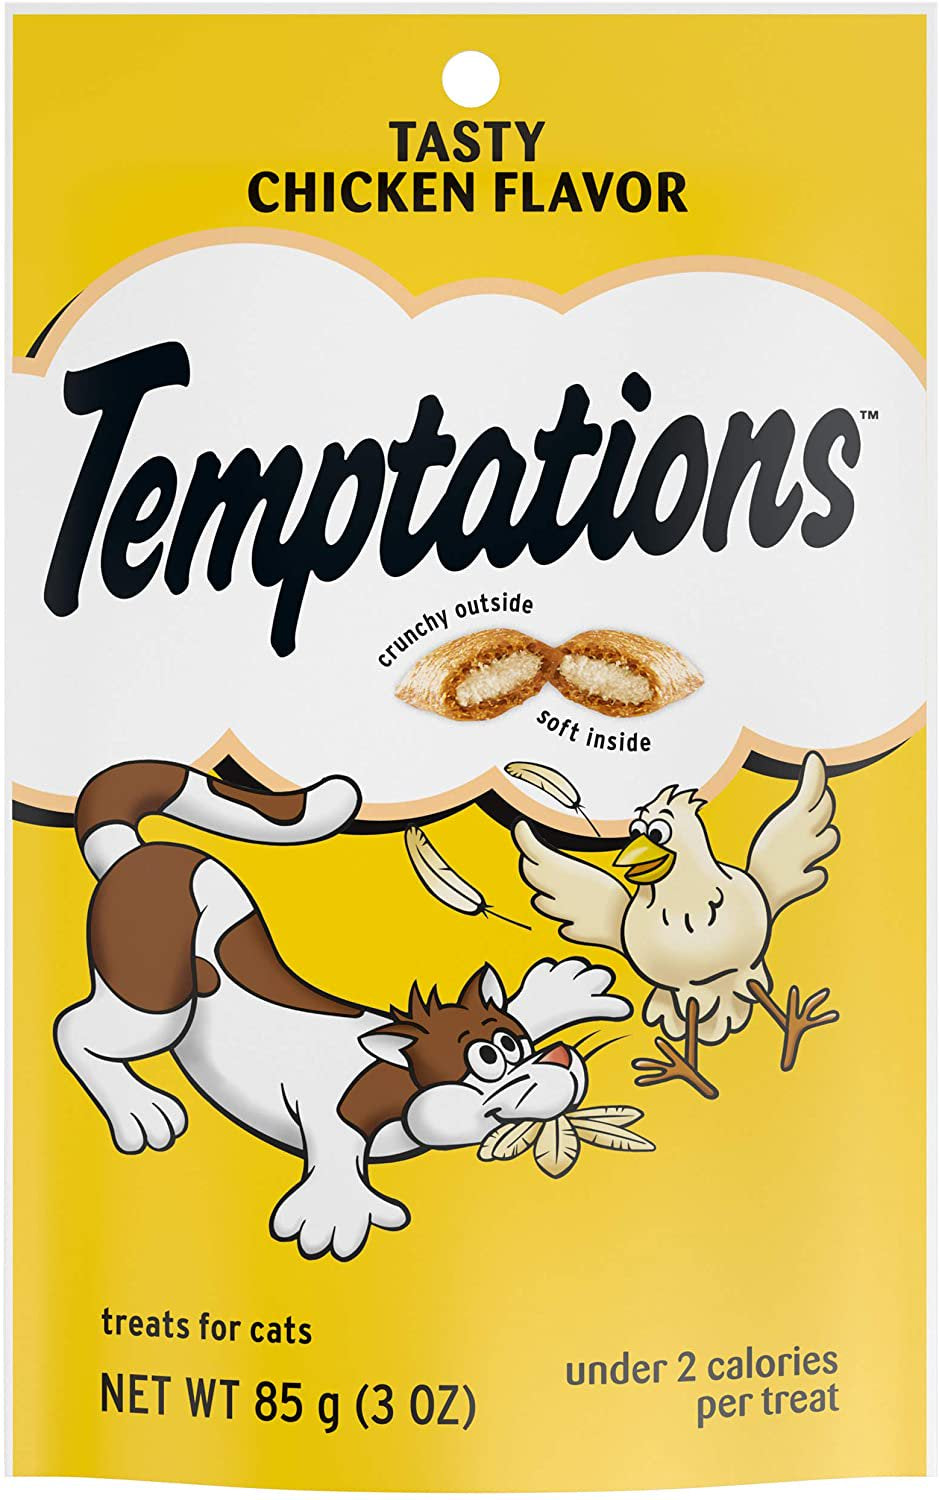 Temptations Cat Treats Variety Pack, Bundle of 7 Flavors (Chicken, Tuna, Salmon, Turkey, Beef, Creamy Dairy and Seafood Medley) with a Pair of Cat Grooming Gloves Animals & Pet Supplies > Pet Supplies > Cat Supplies > Cat Treats Mars Petcare   